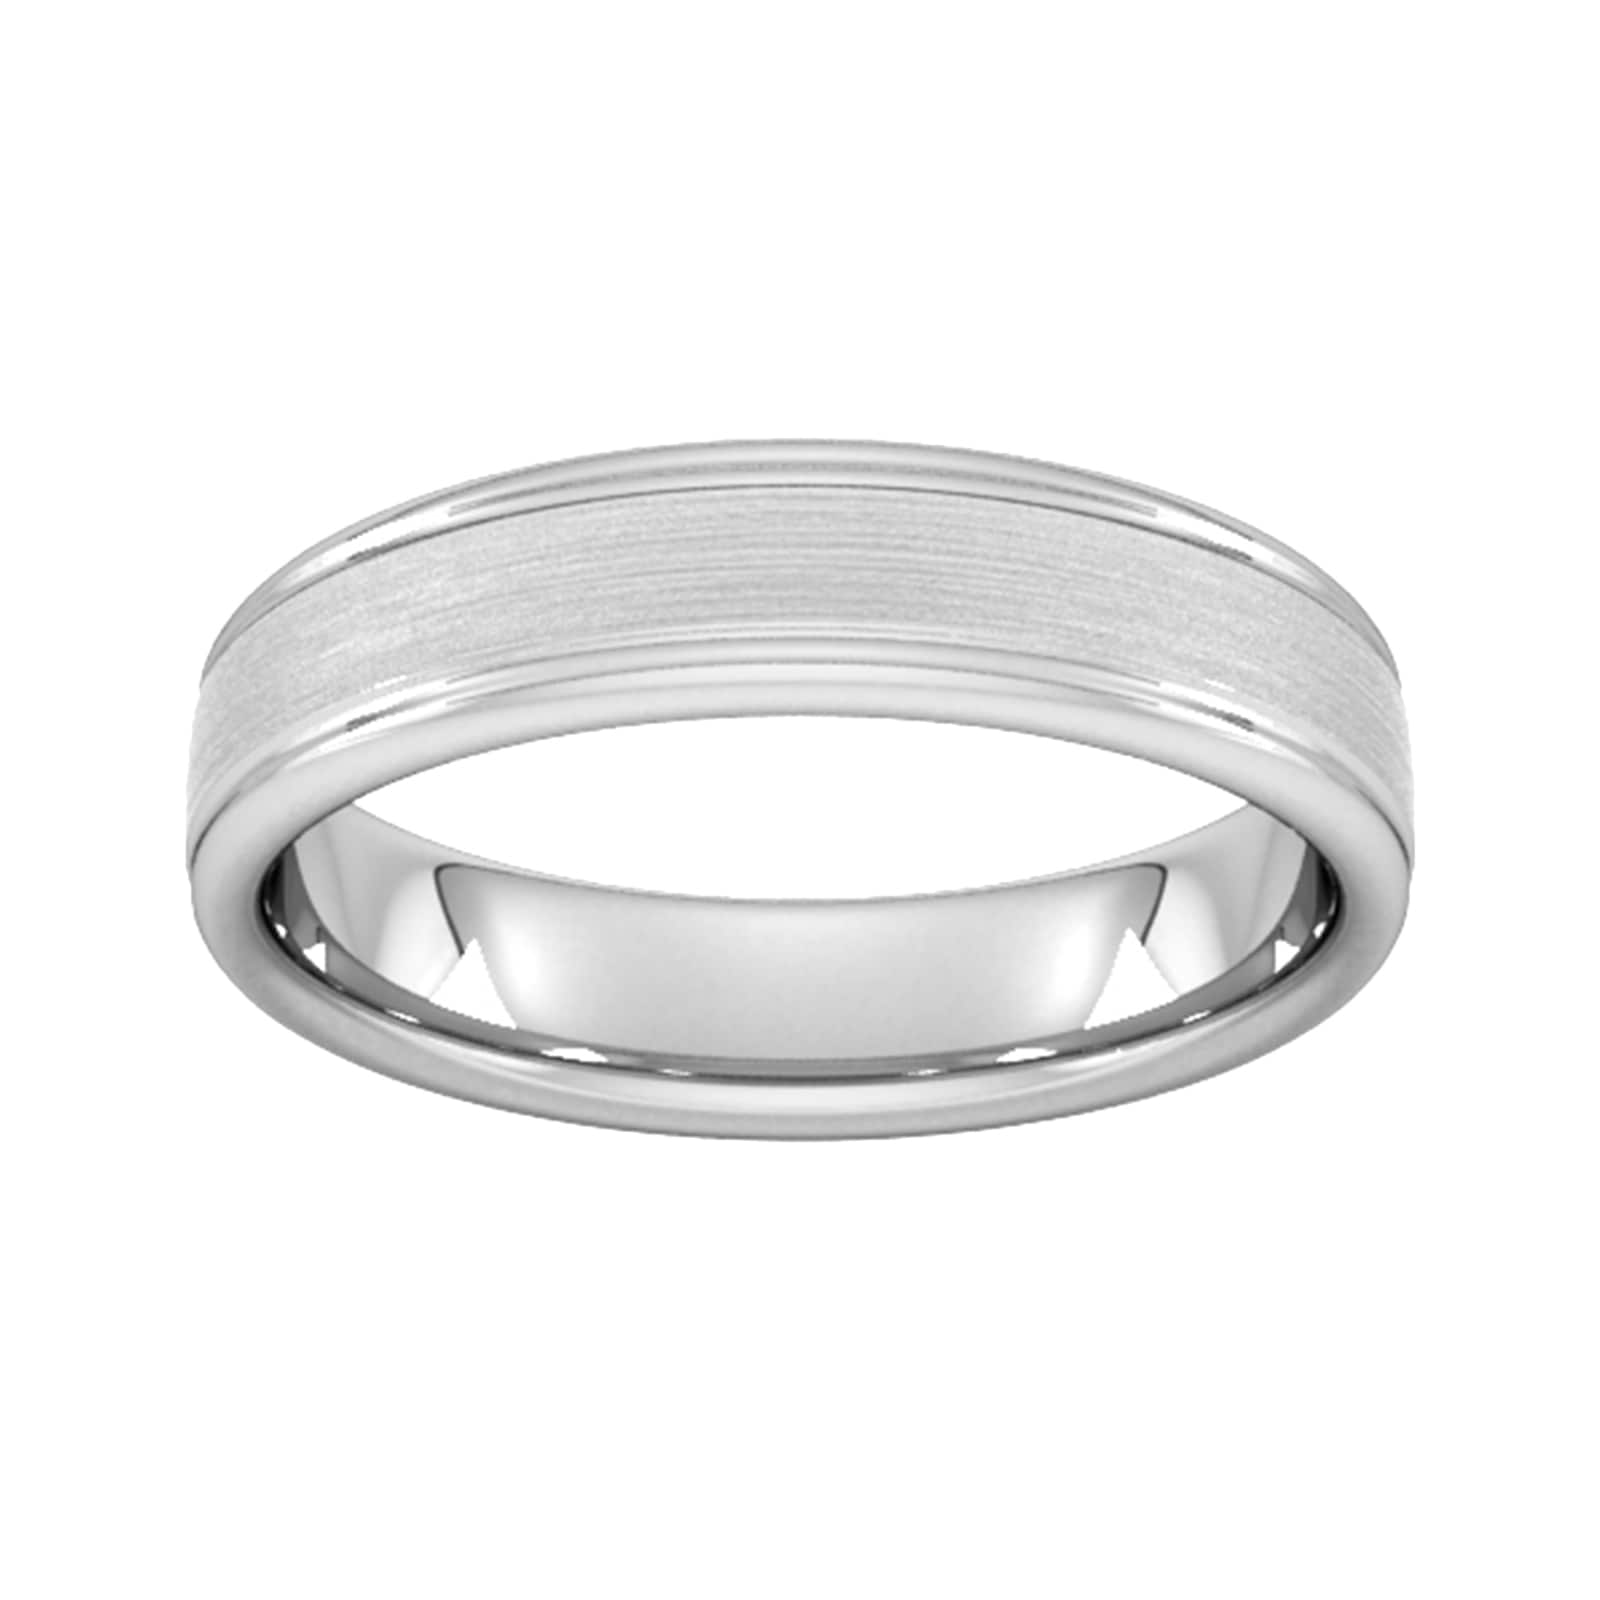 5mm Traditional Court Heavy Matt Centre With Grooves Wedding Ring In 18 Carat White Gold - Ring Size N